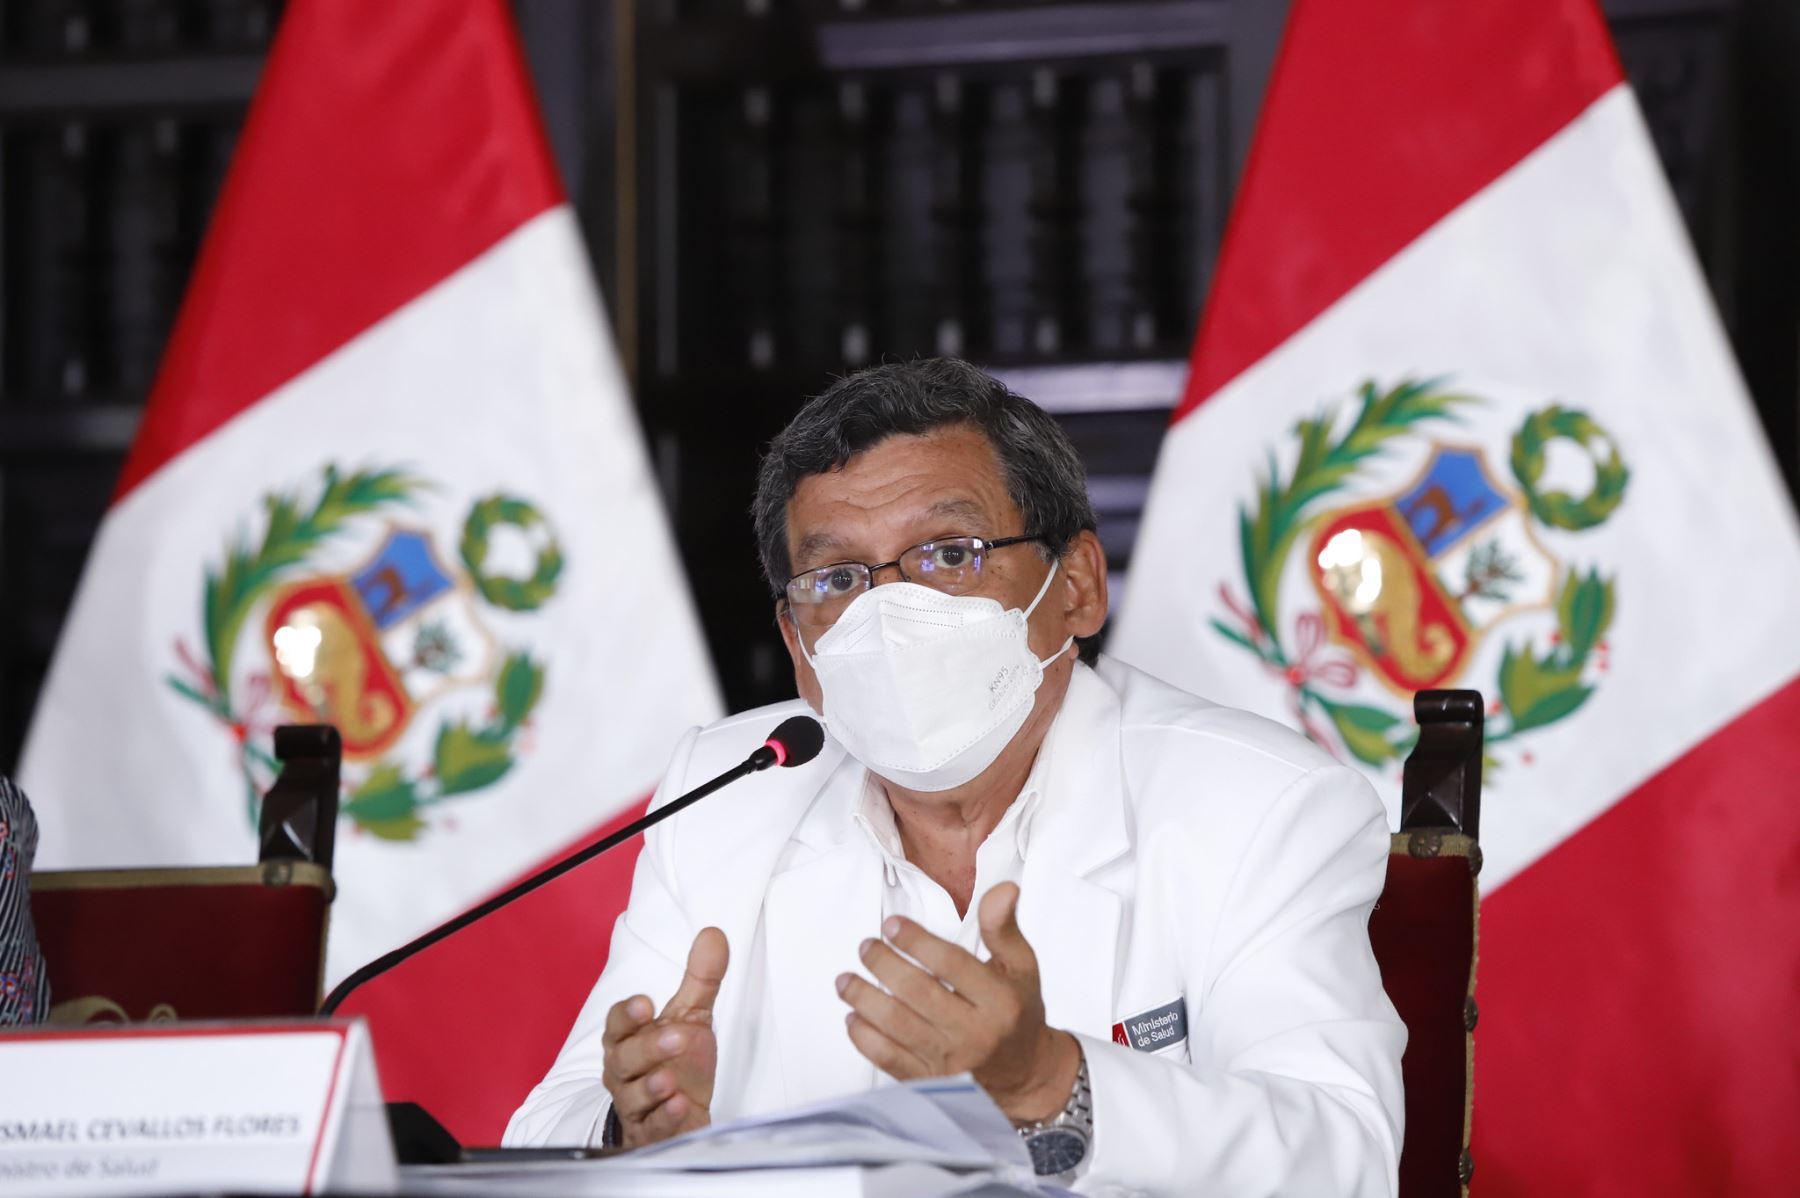 Photo: ANDINA/Presidency of the Council of Ministers of Peru